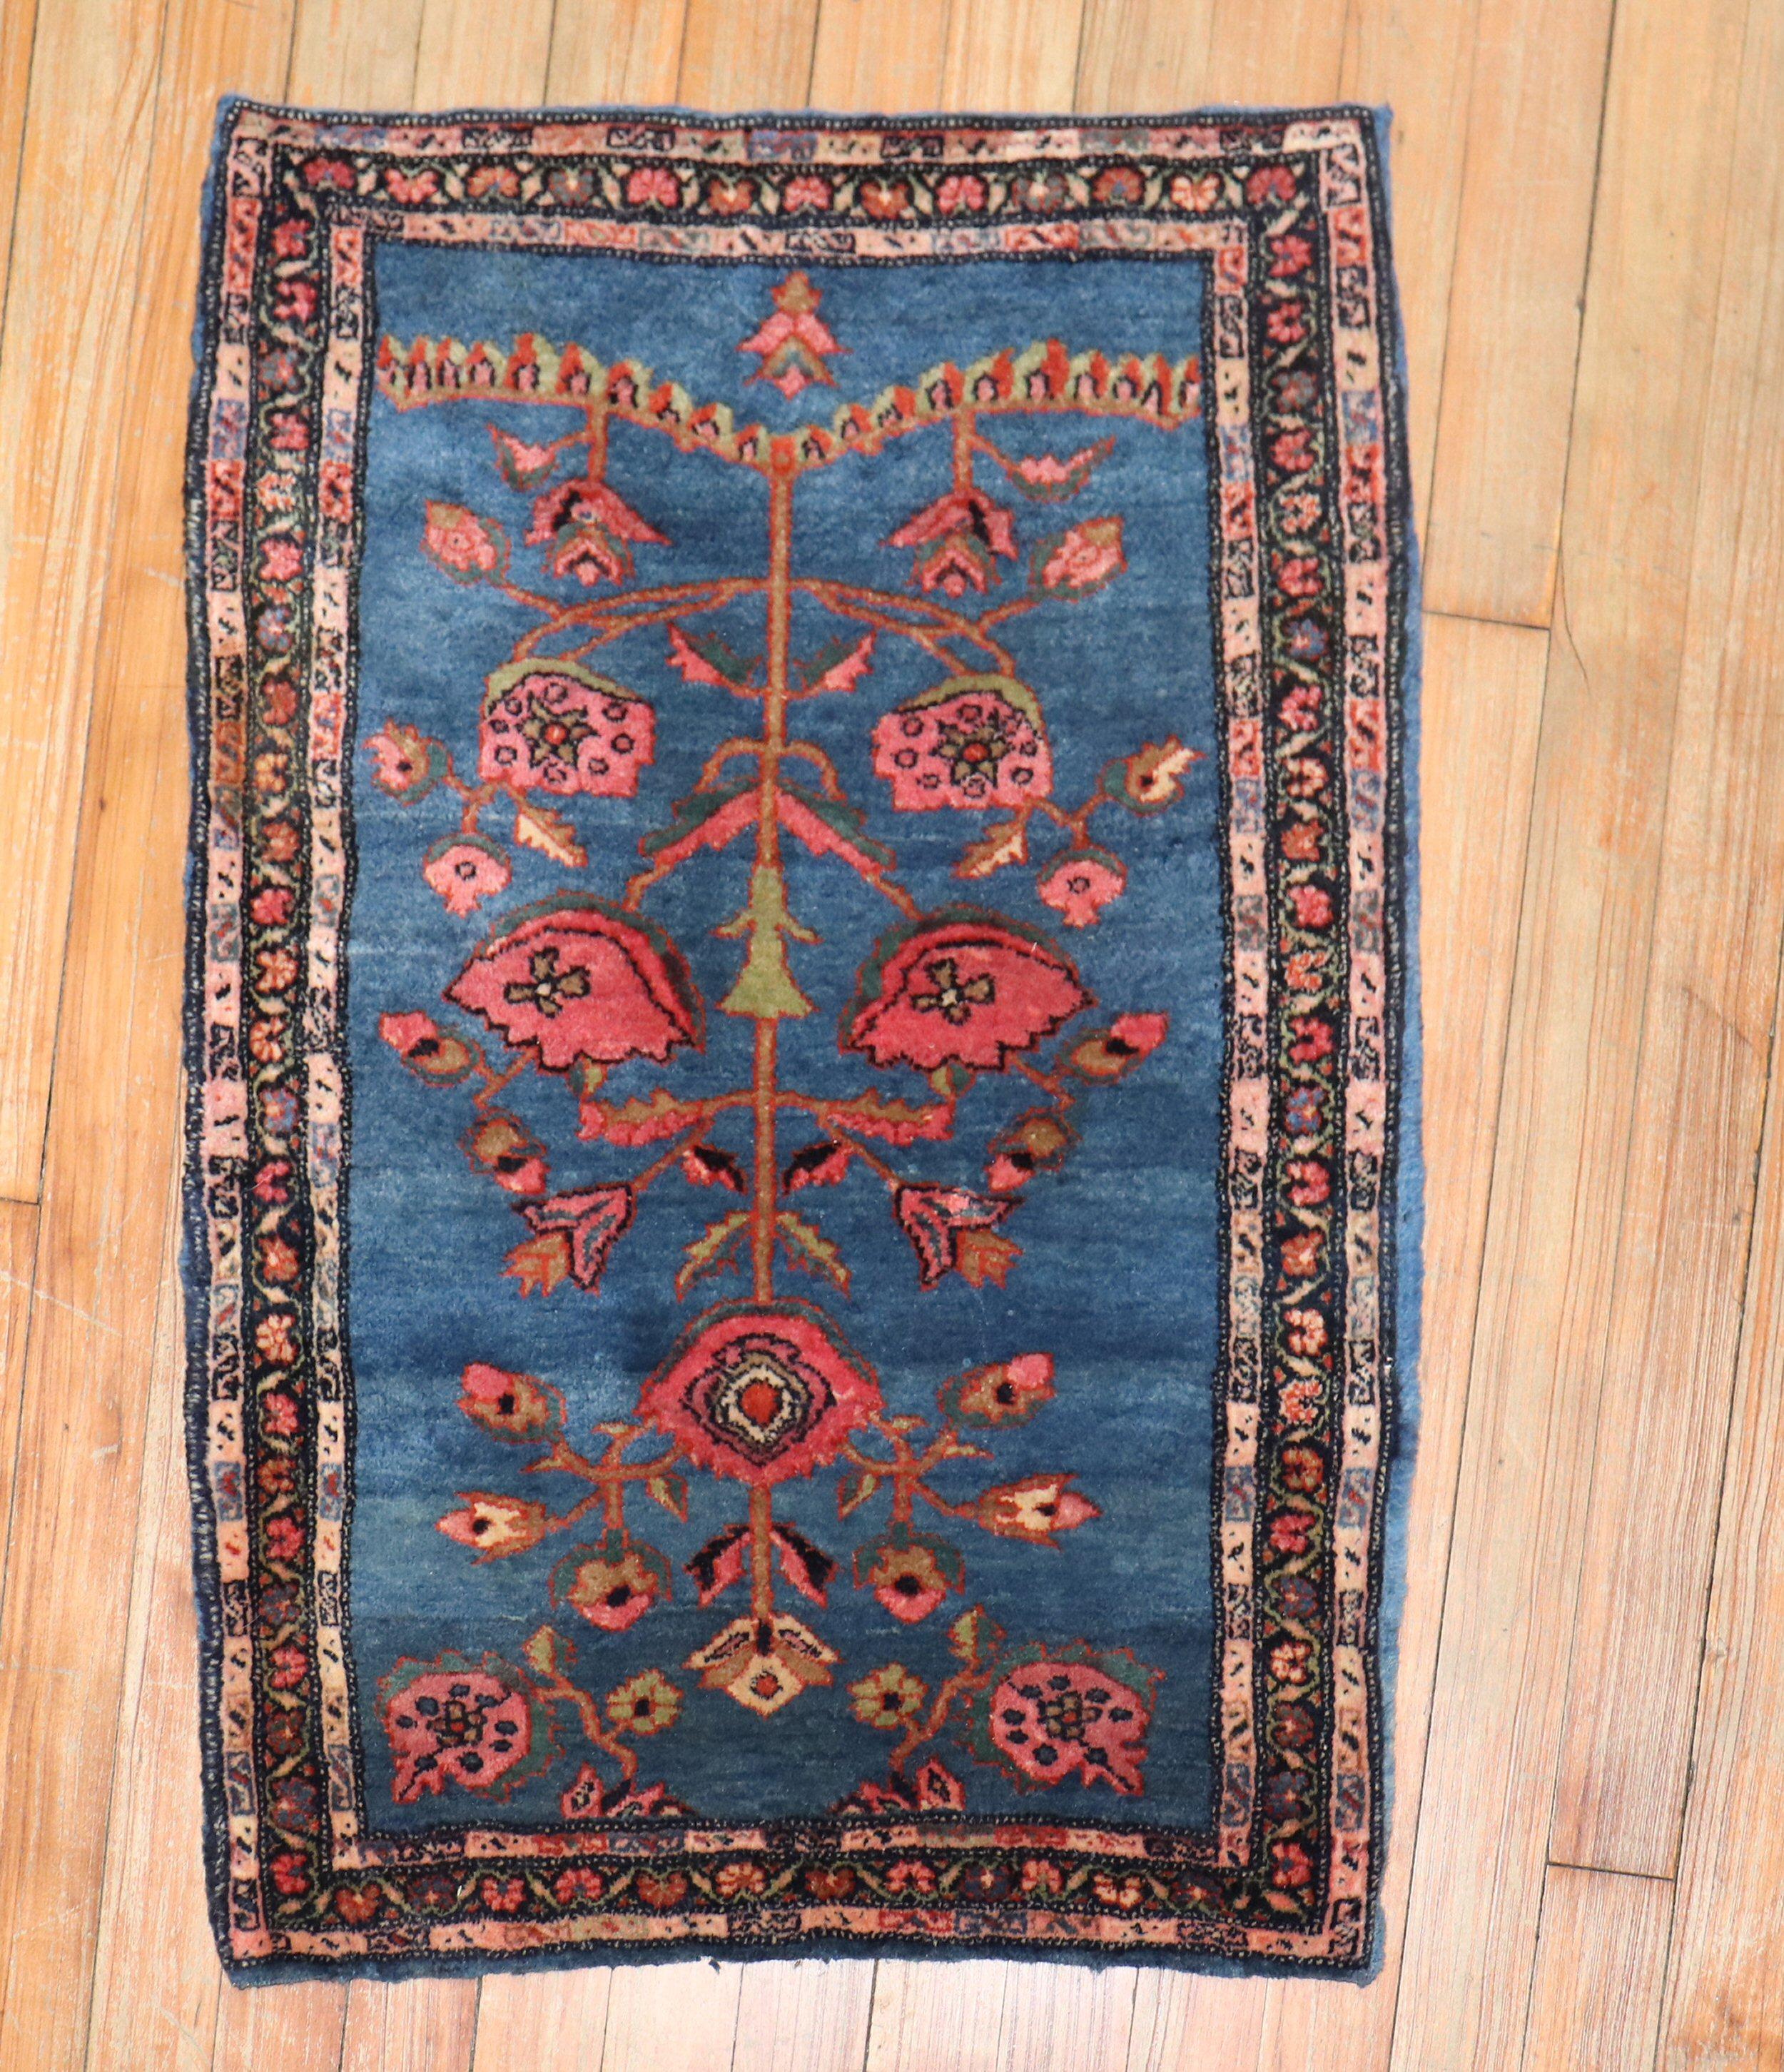 An authentic early 20th-century Sarouk carpet in enchanting blue and red tones 

Measures: 1'9